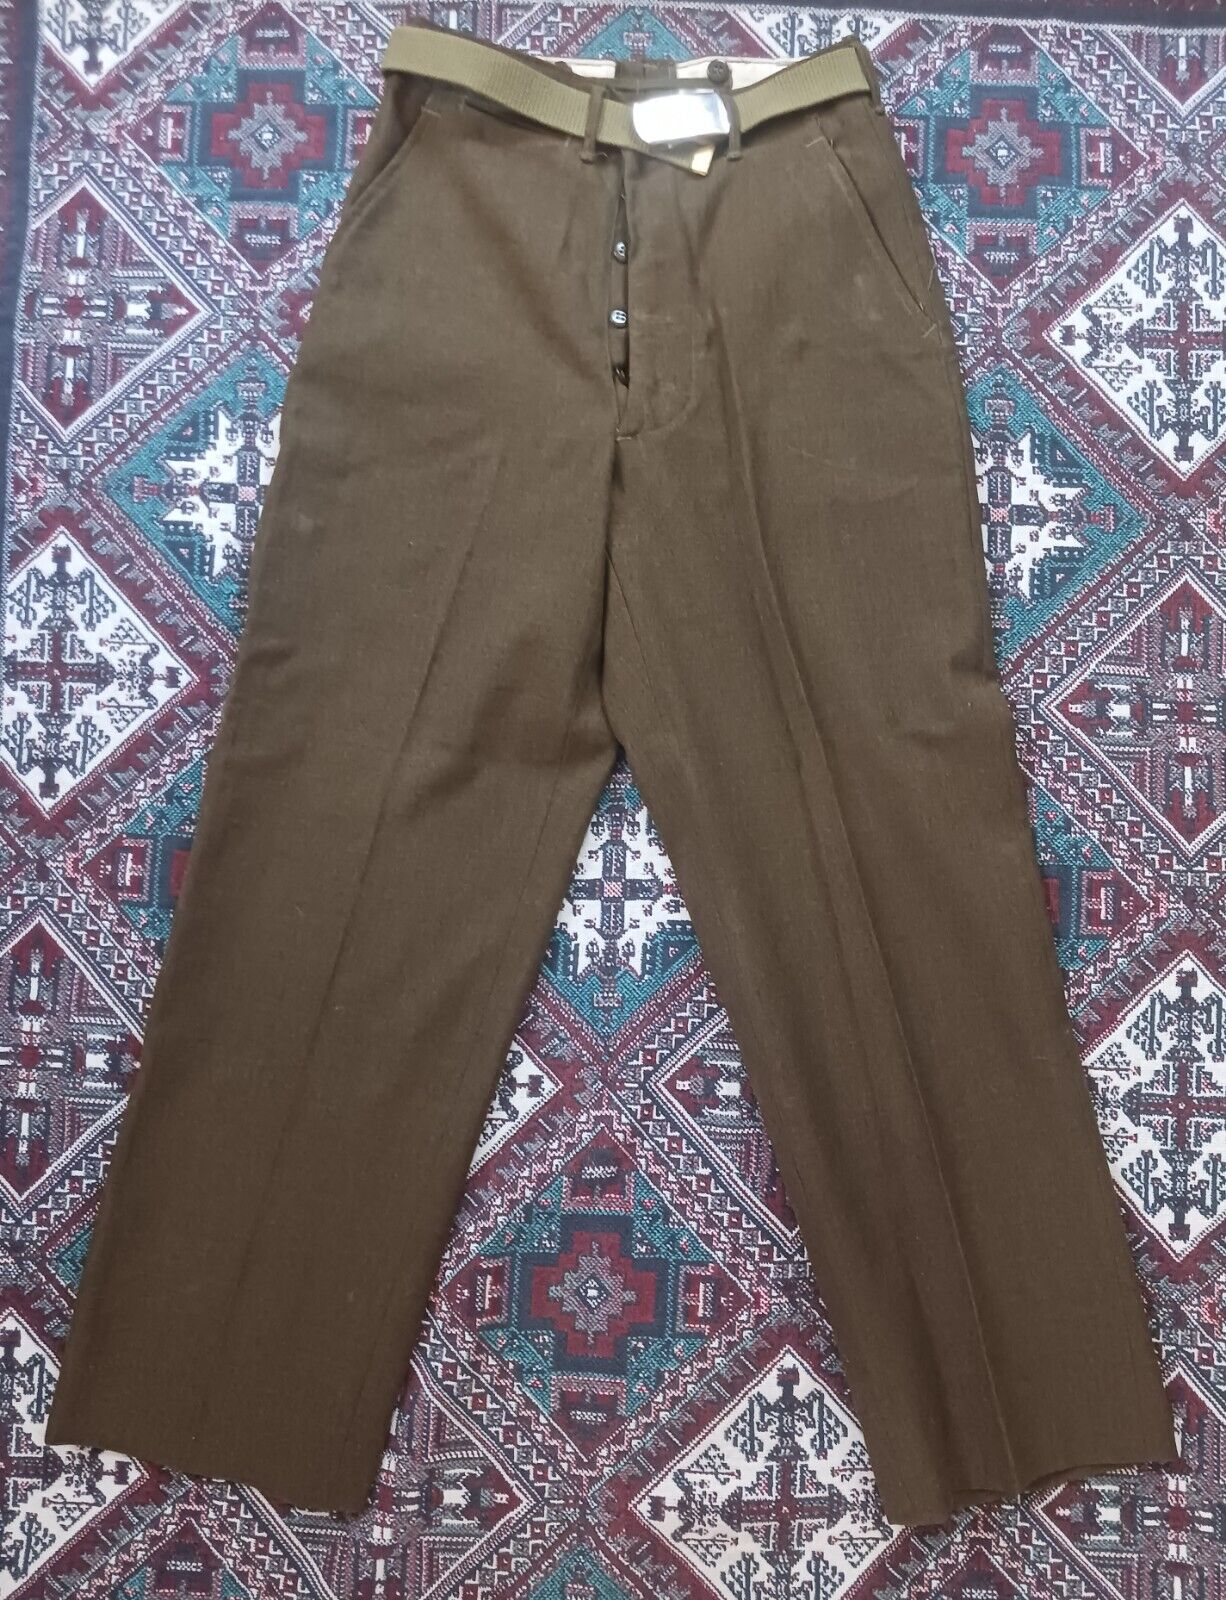 Vintage 1940s WW2 Military Pants 31x30 Olive Green Wool 55-T-35430-31 With Belt